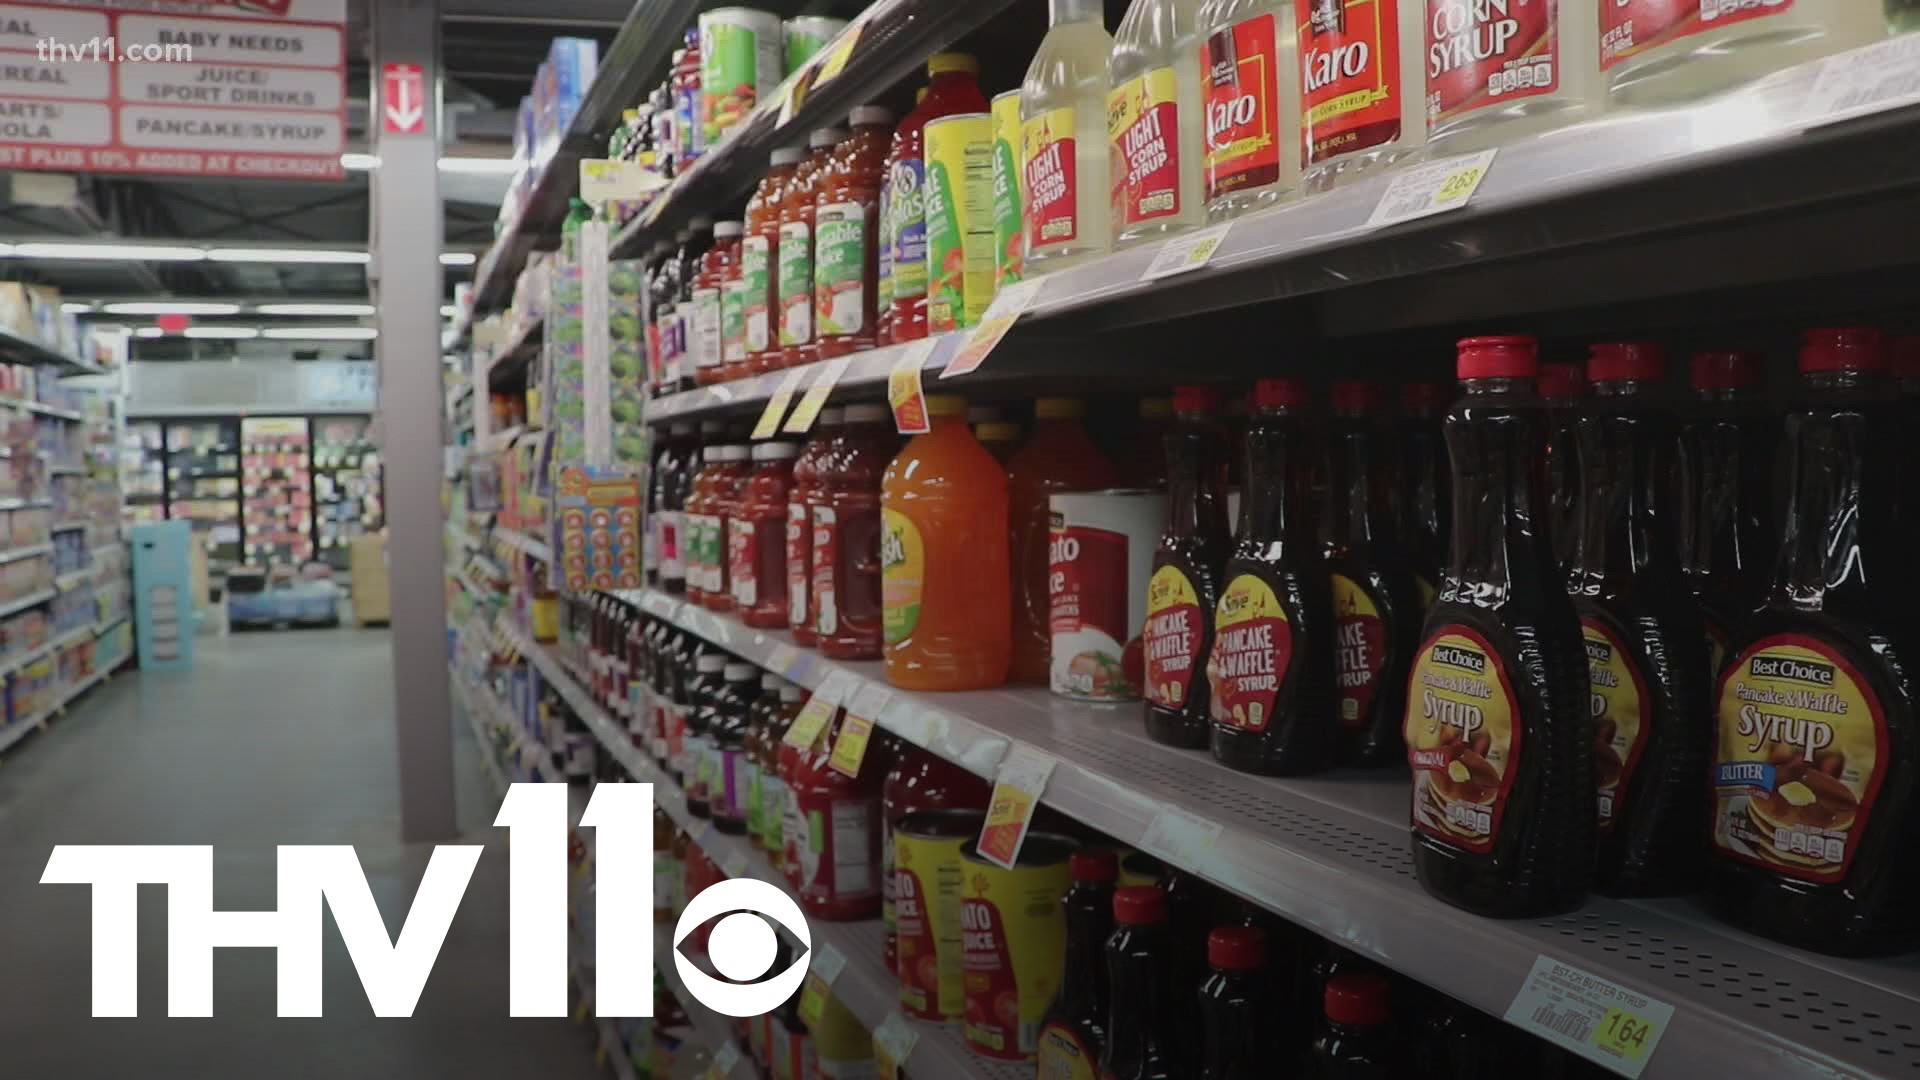 It's a trend the nation saw this time last year when we headed into the grocery stores. But this time it's not empty shelves, but it's prices jumping!